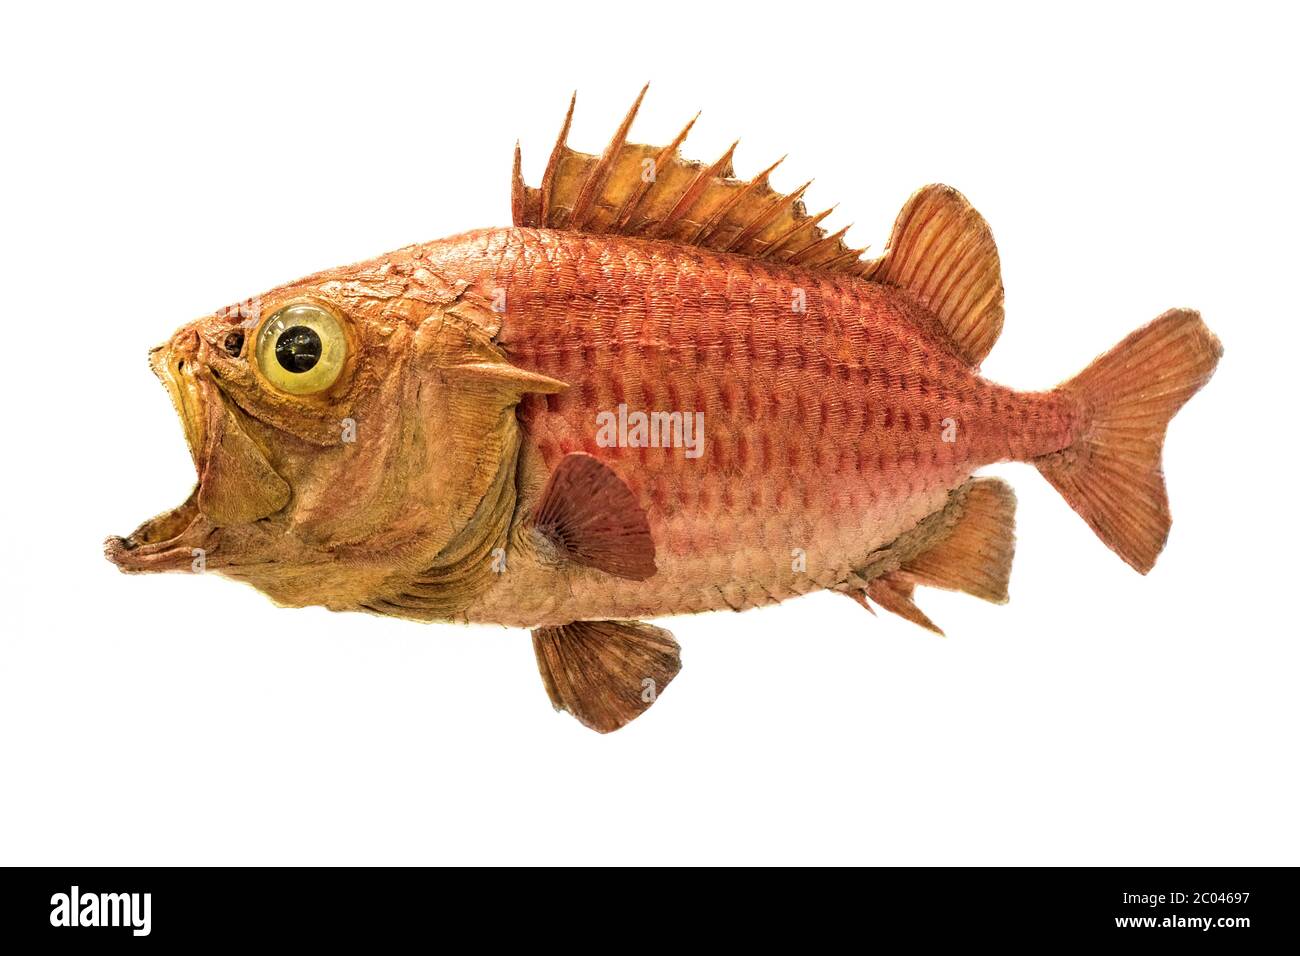 Japanese soldierfish Ostichthys japonicus. Soldier fish specimen isolated on white background. Brocade perch goldfish from the Andaman islands. Funny Stock Photo